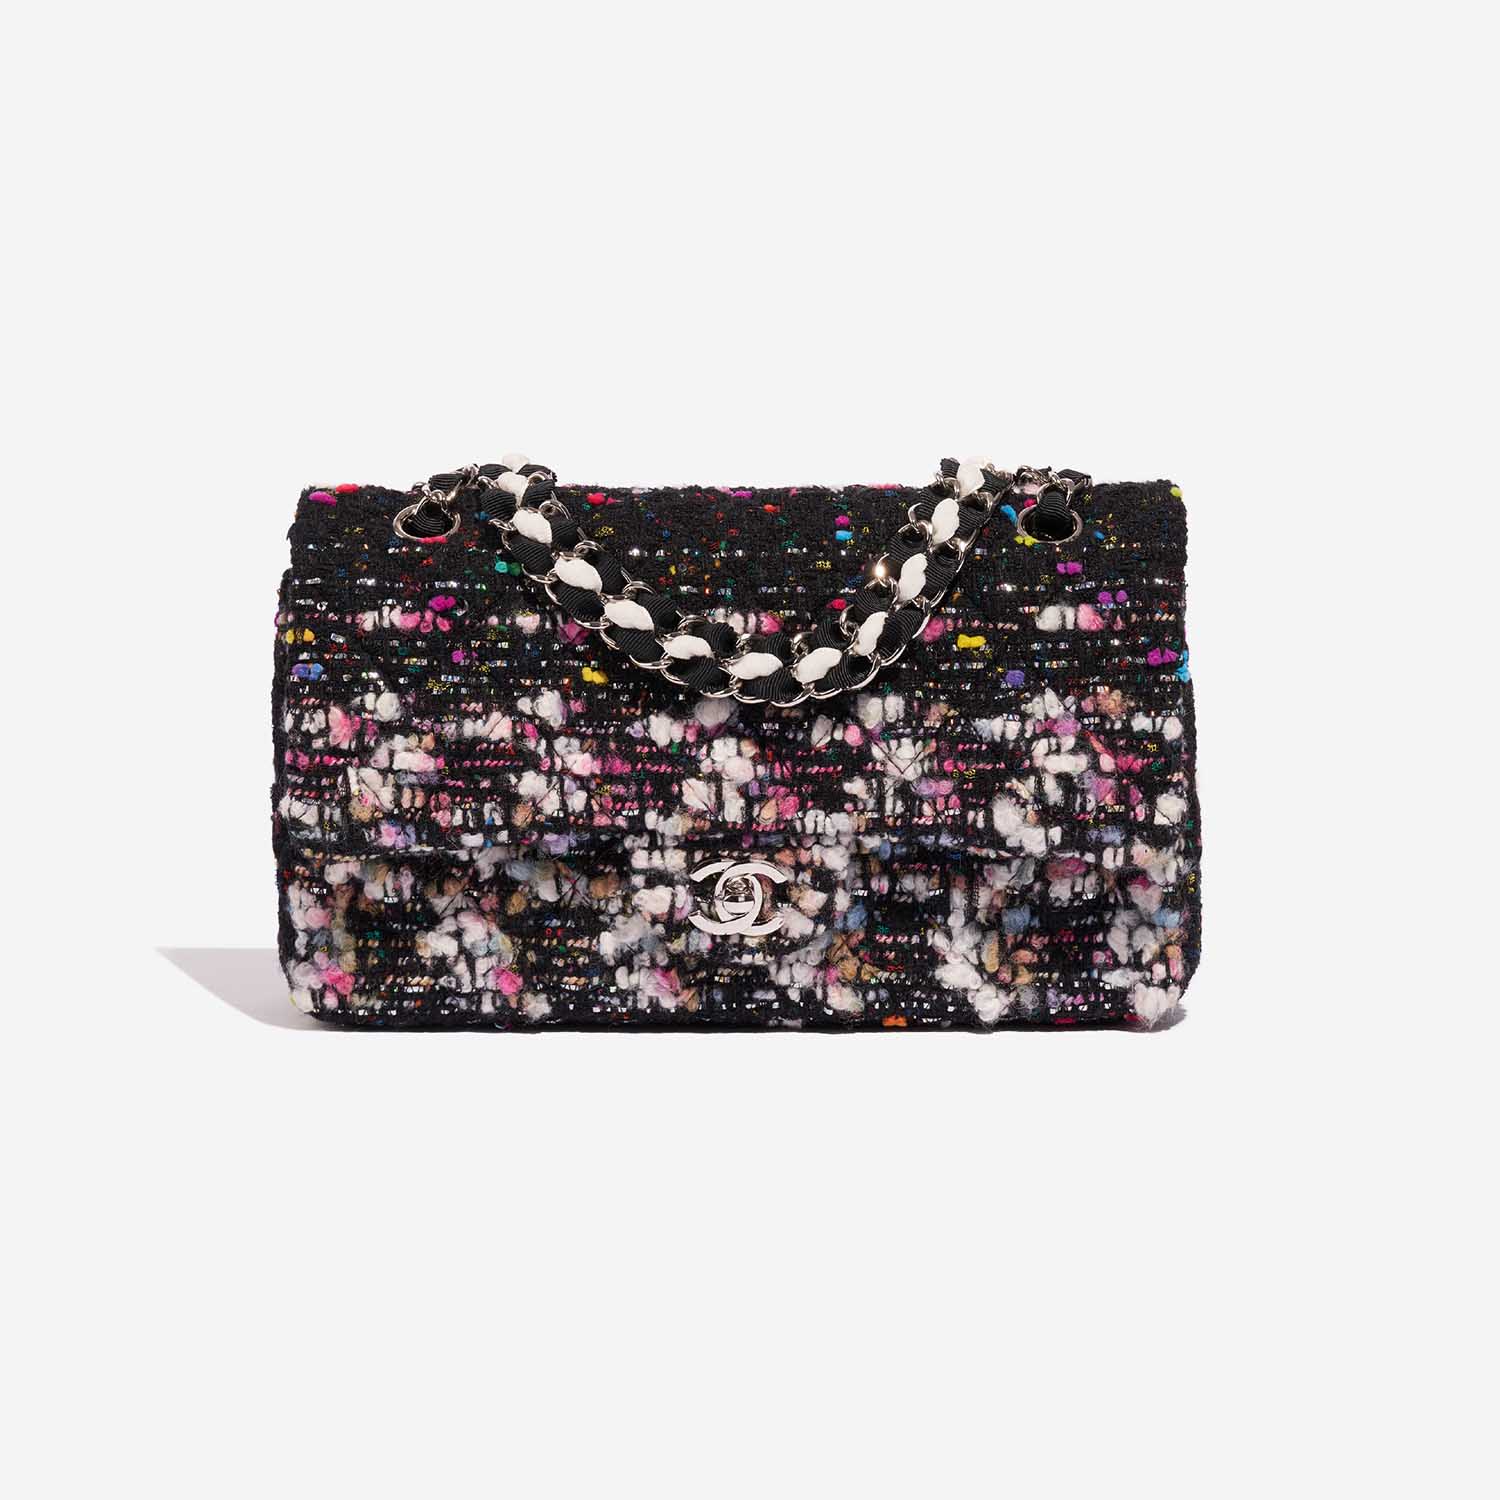 Pre-owned Chanel bag Timeless Medium Tweed Black / Multicolour Black, Multicolour Front | Sell your designer bag on Saclab.com